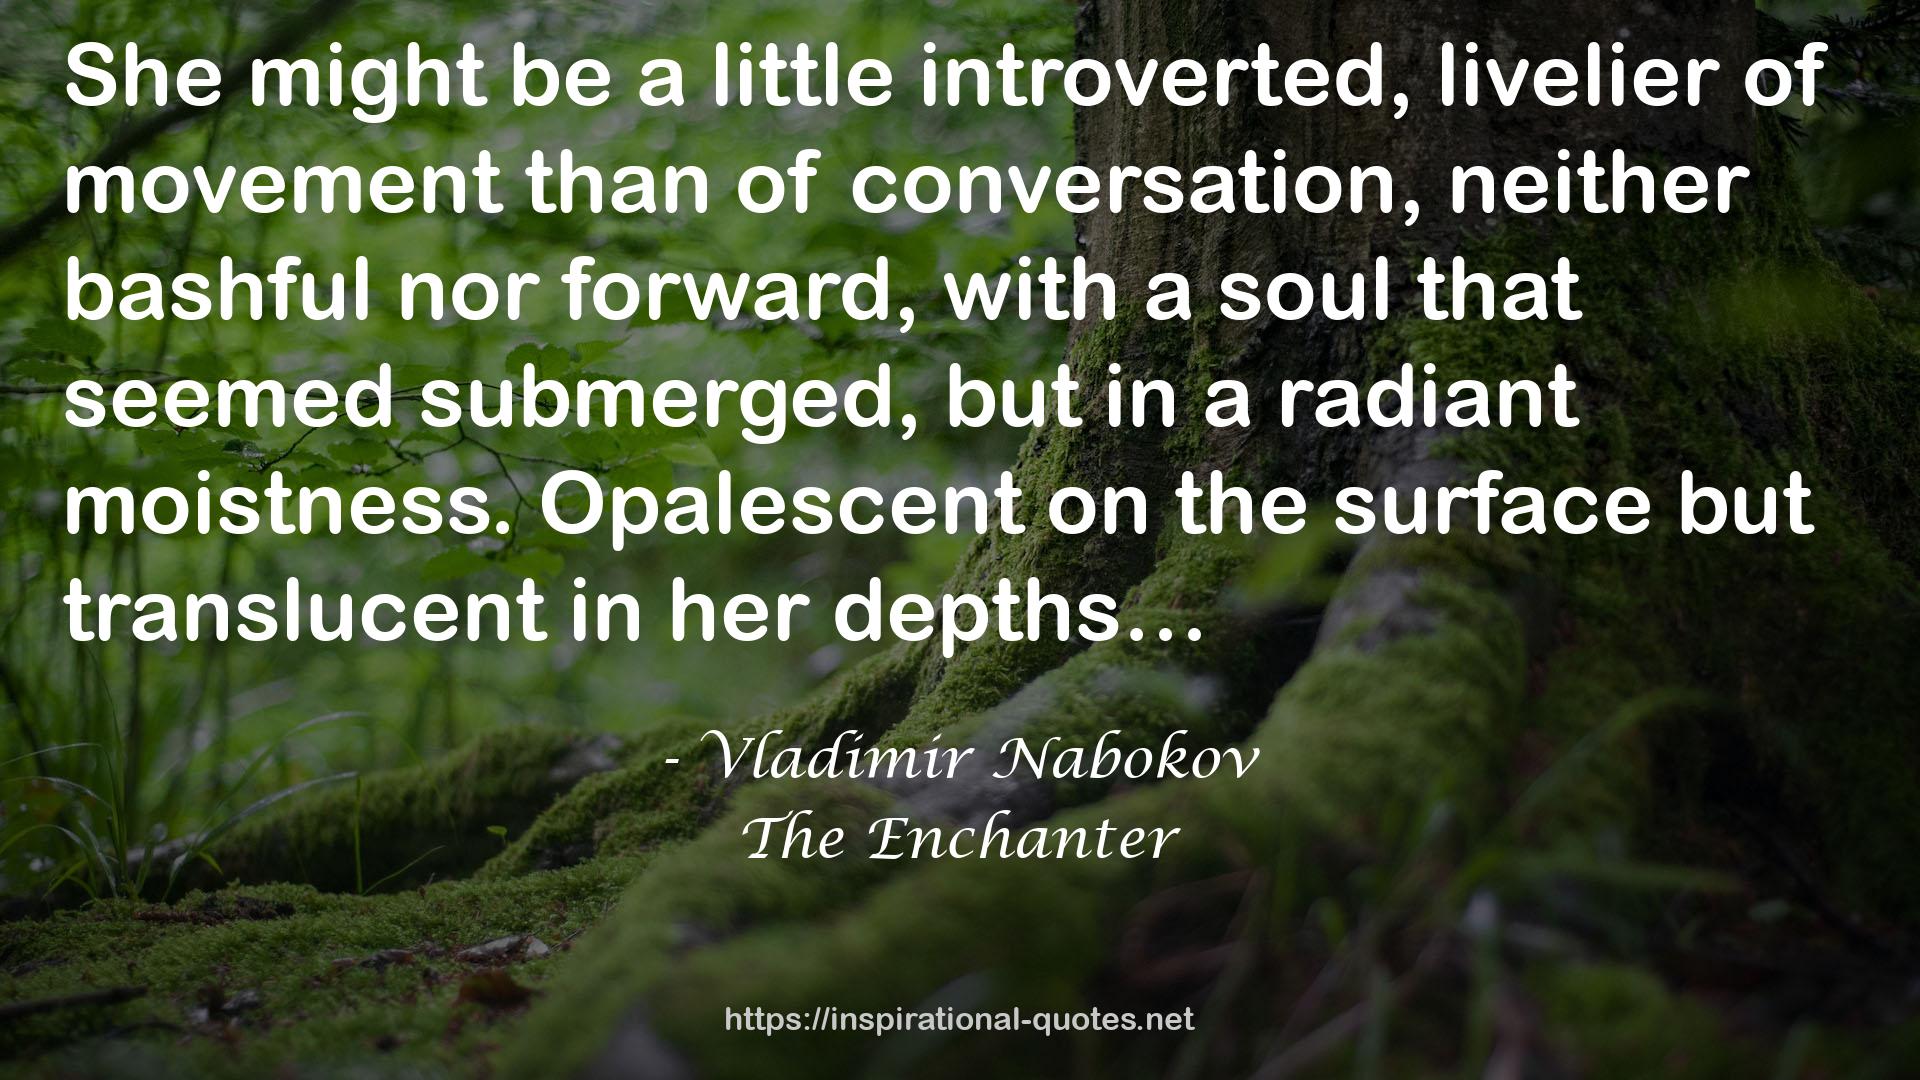 The Enchanter QUOTES